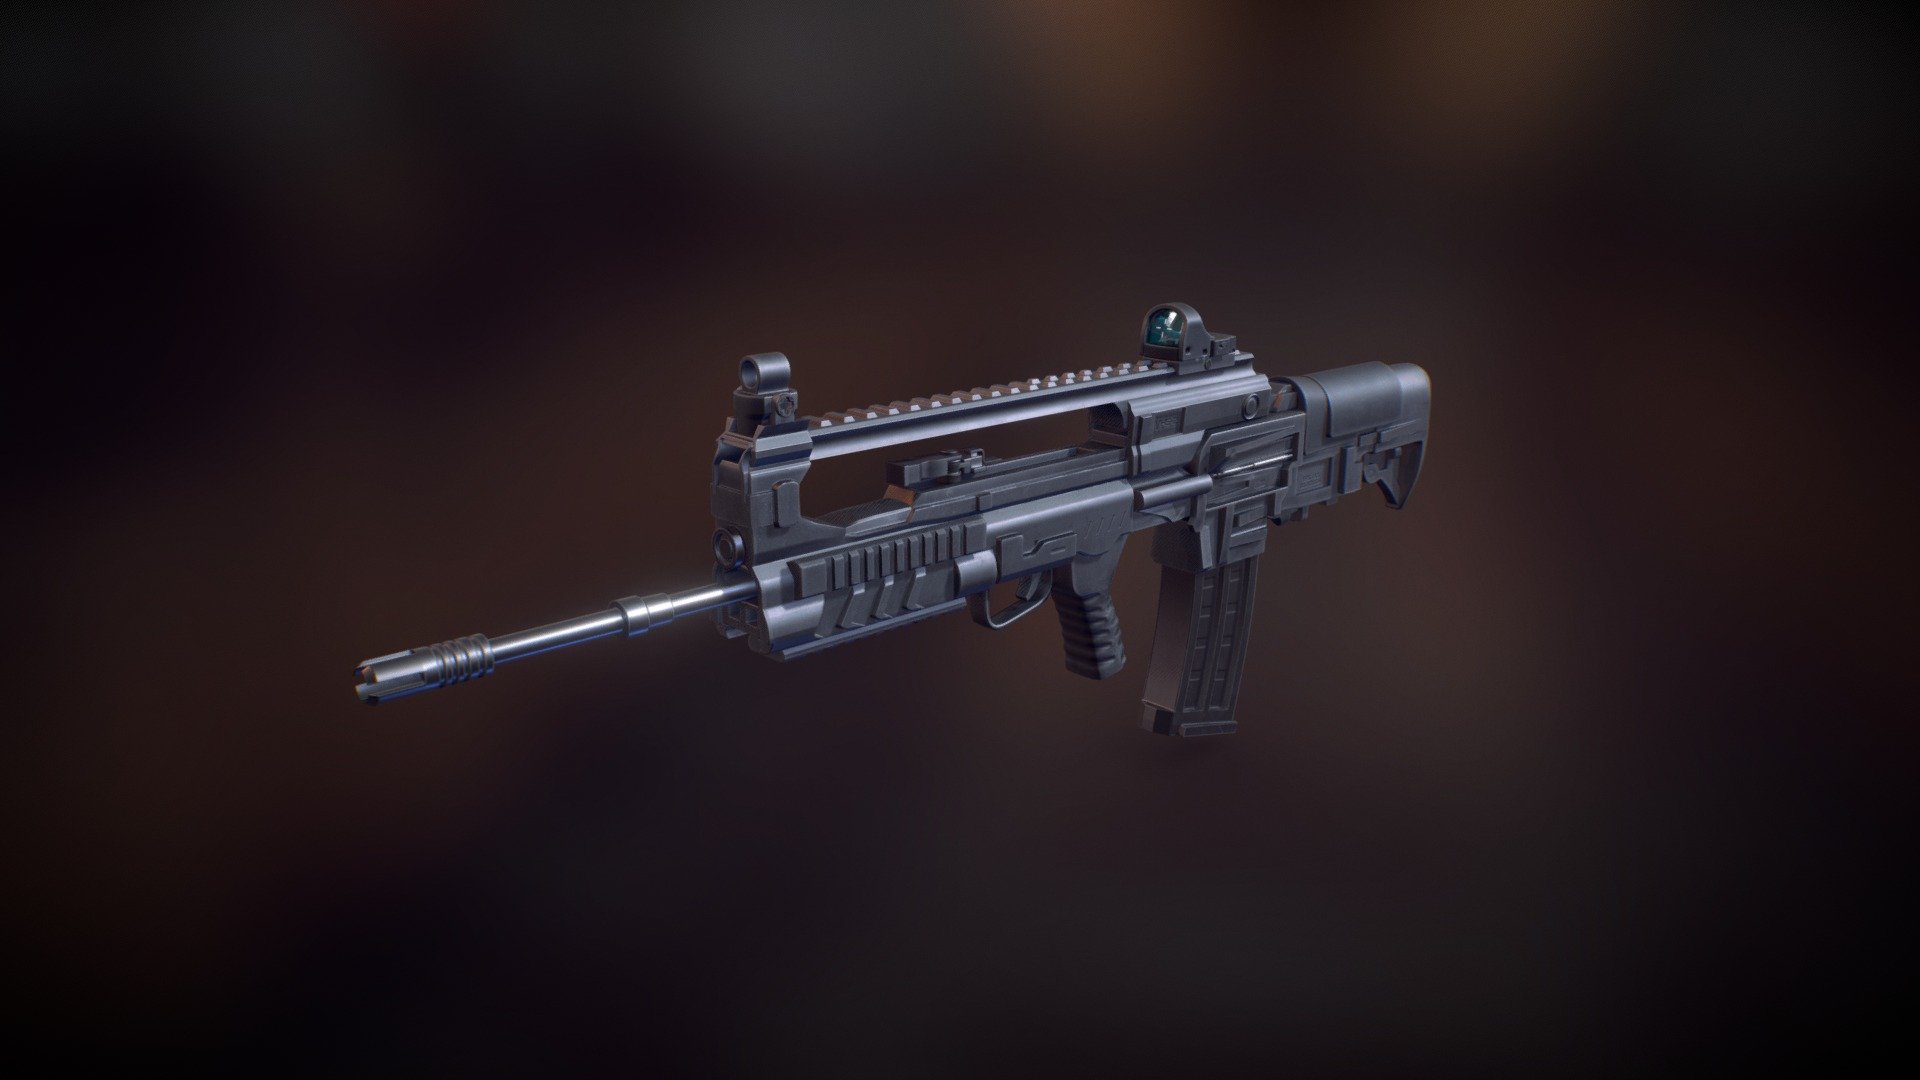 Game ready asset for an Assault Rifle. Highly optimized for virtual reality and augmented reality 3d model